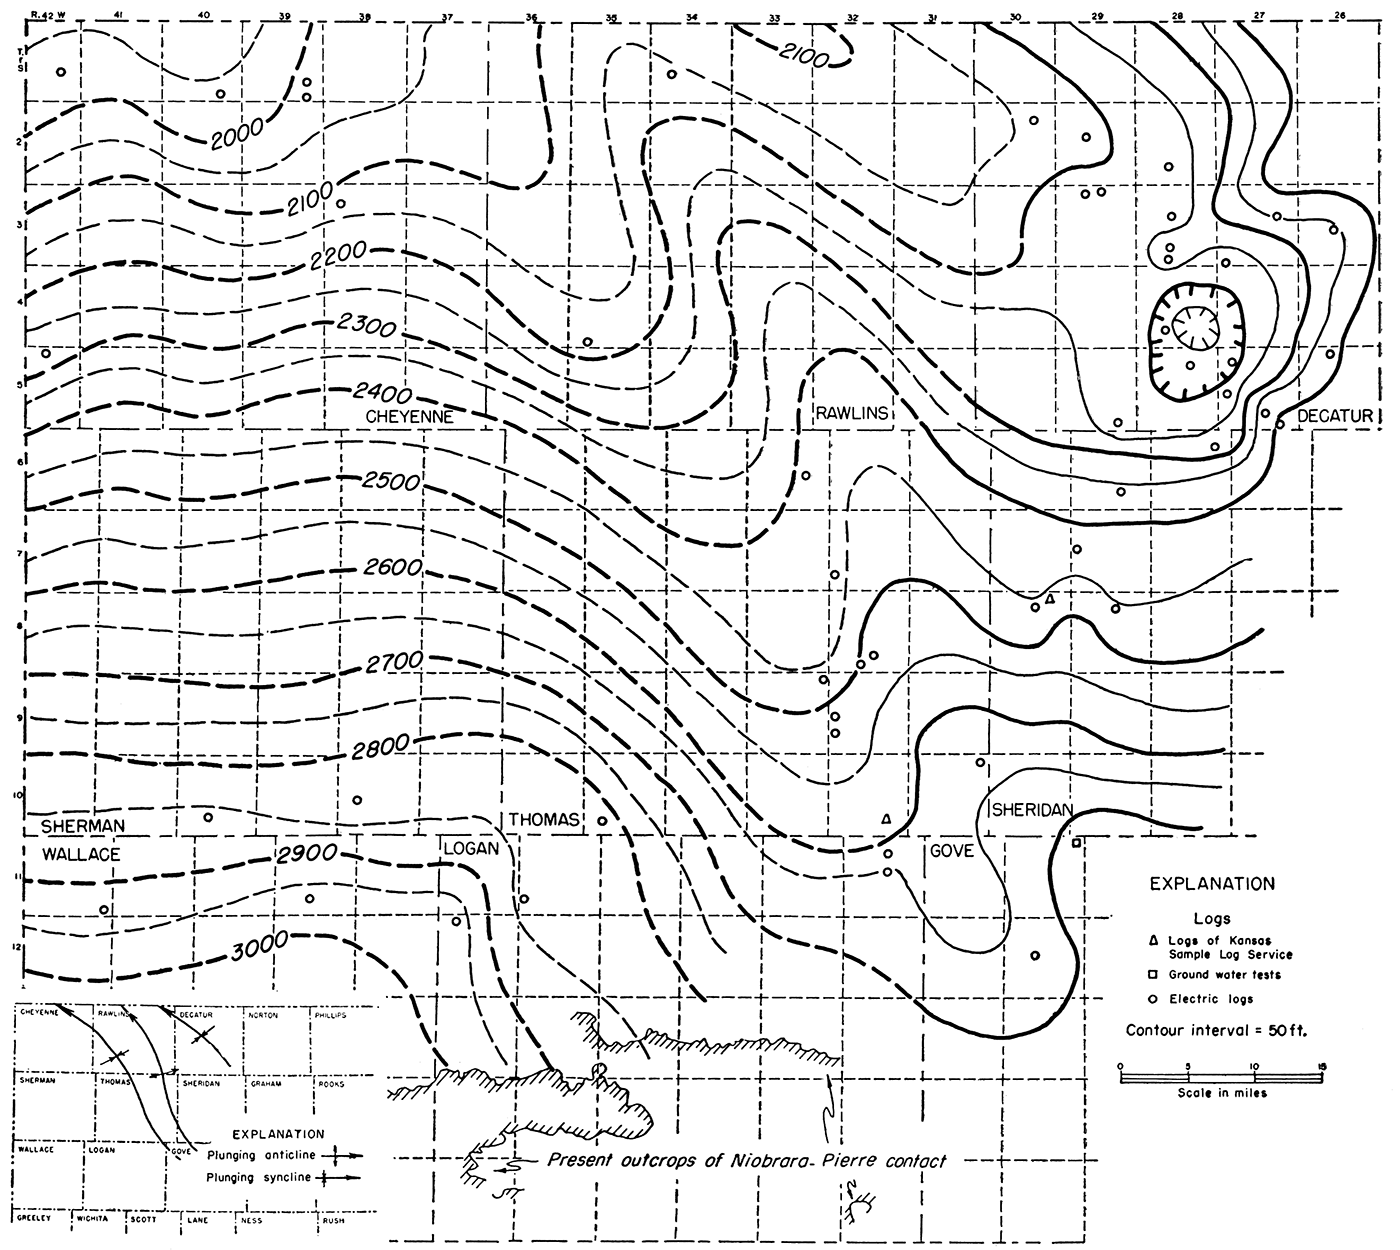 Map showing by 50-foot contours the approximate structure of the top of the Niobrara formation based on widely separated wells, and inset indicating the axes of principal folds.